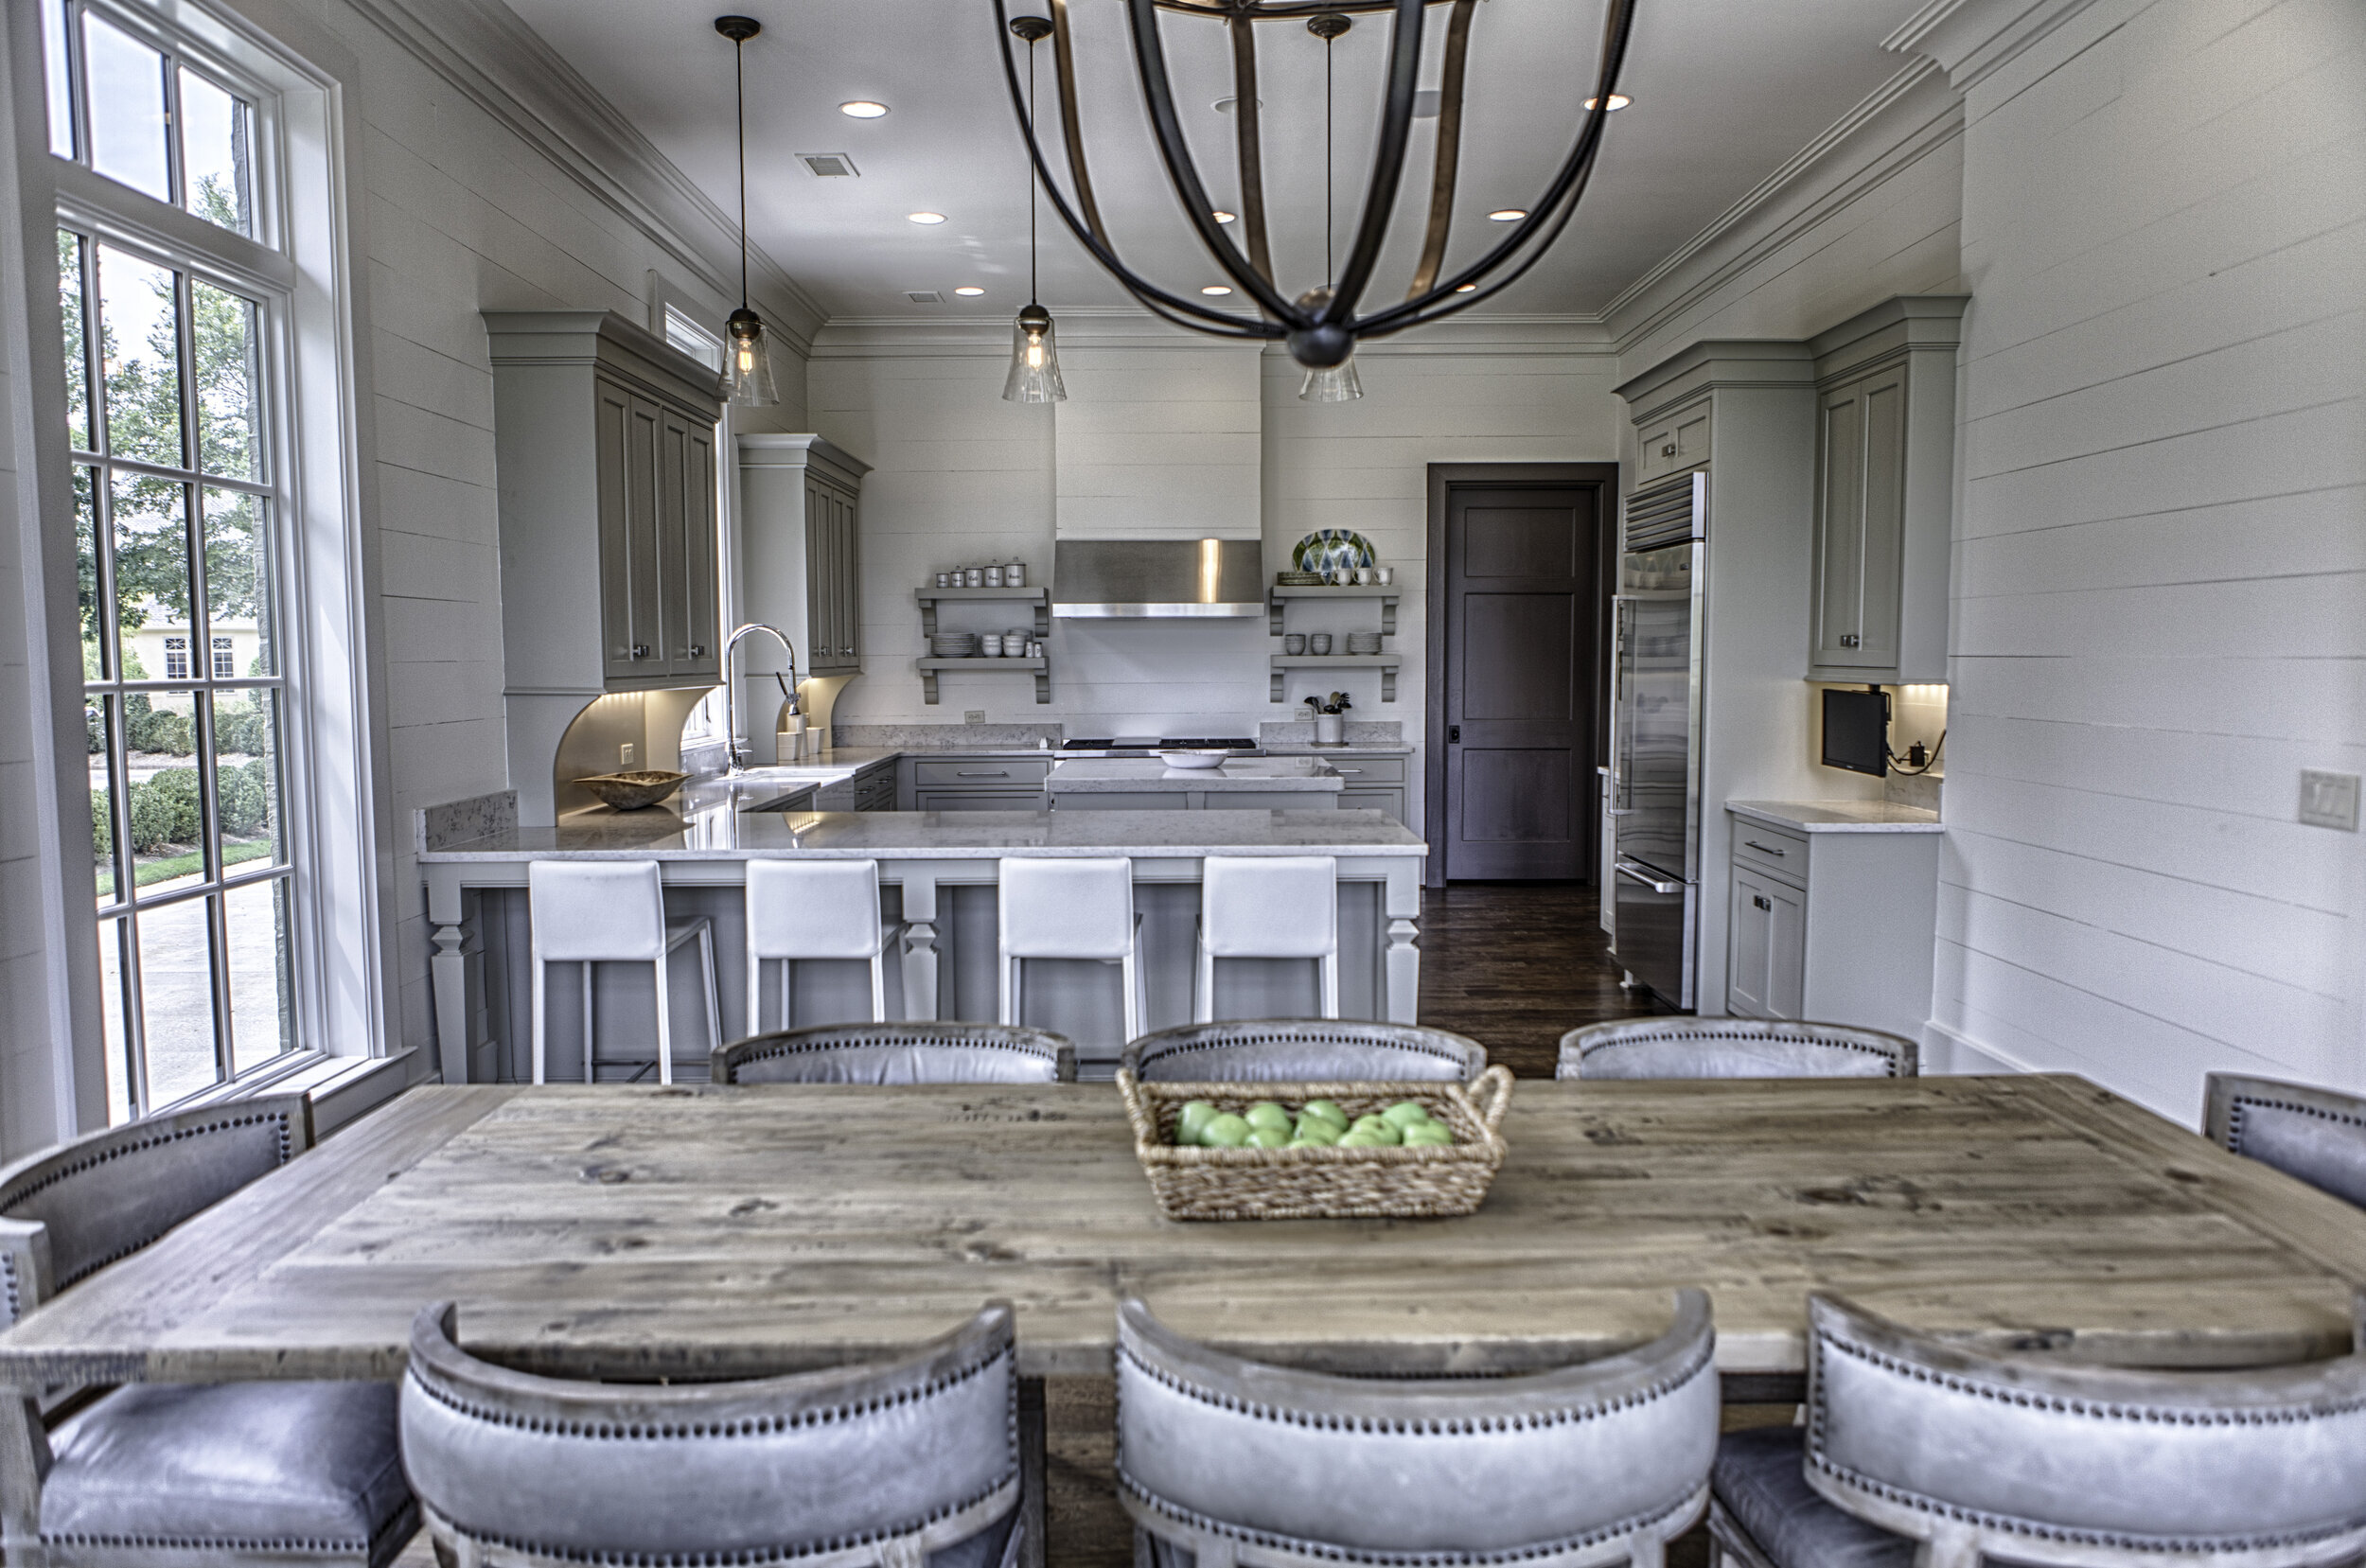 Farmhouse Style in Your Remodeled Kitchen